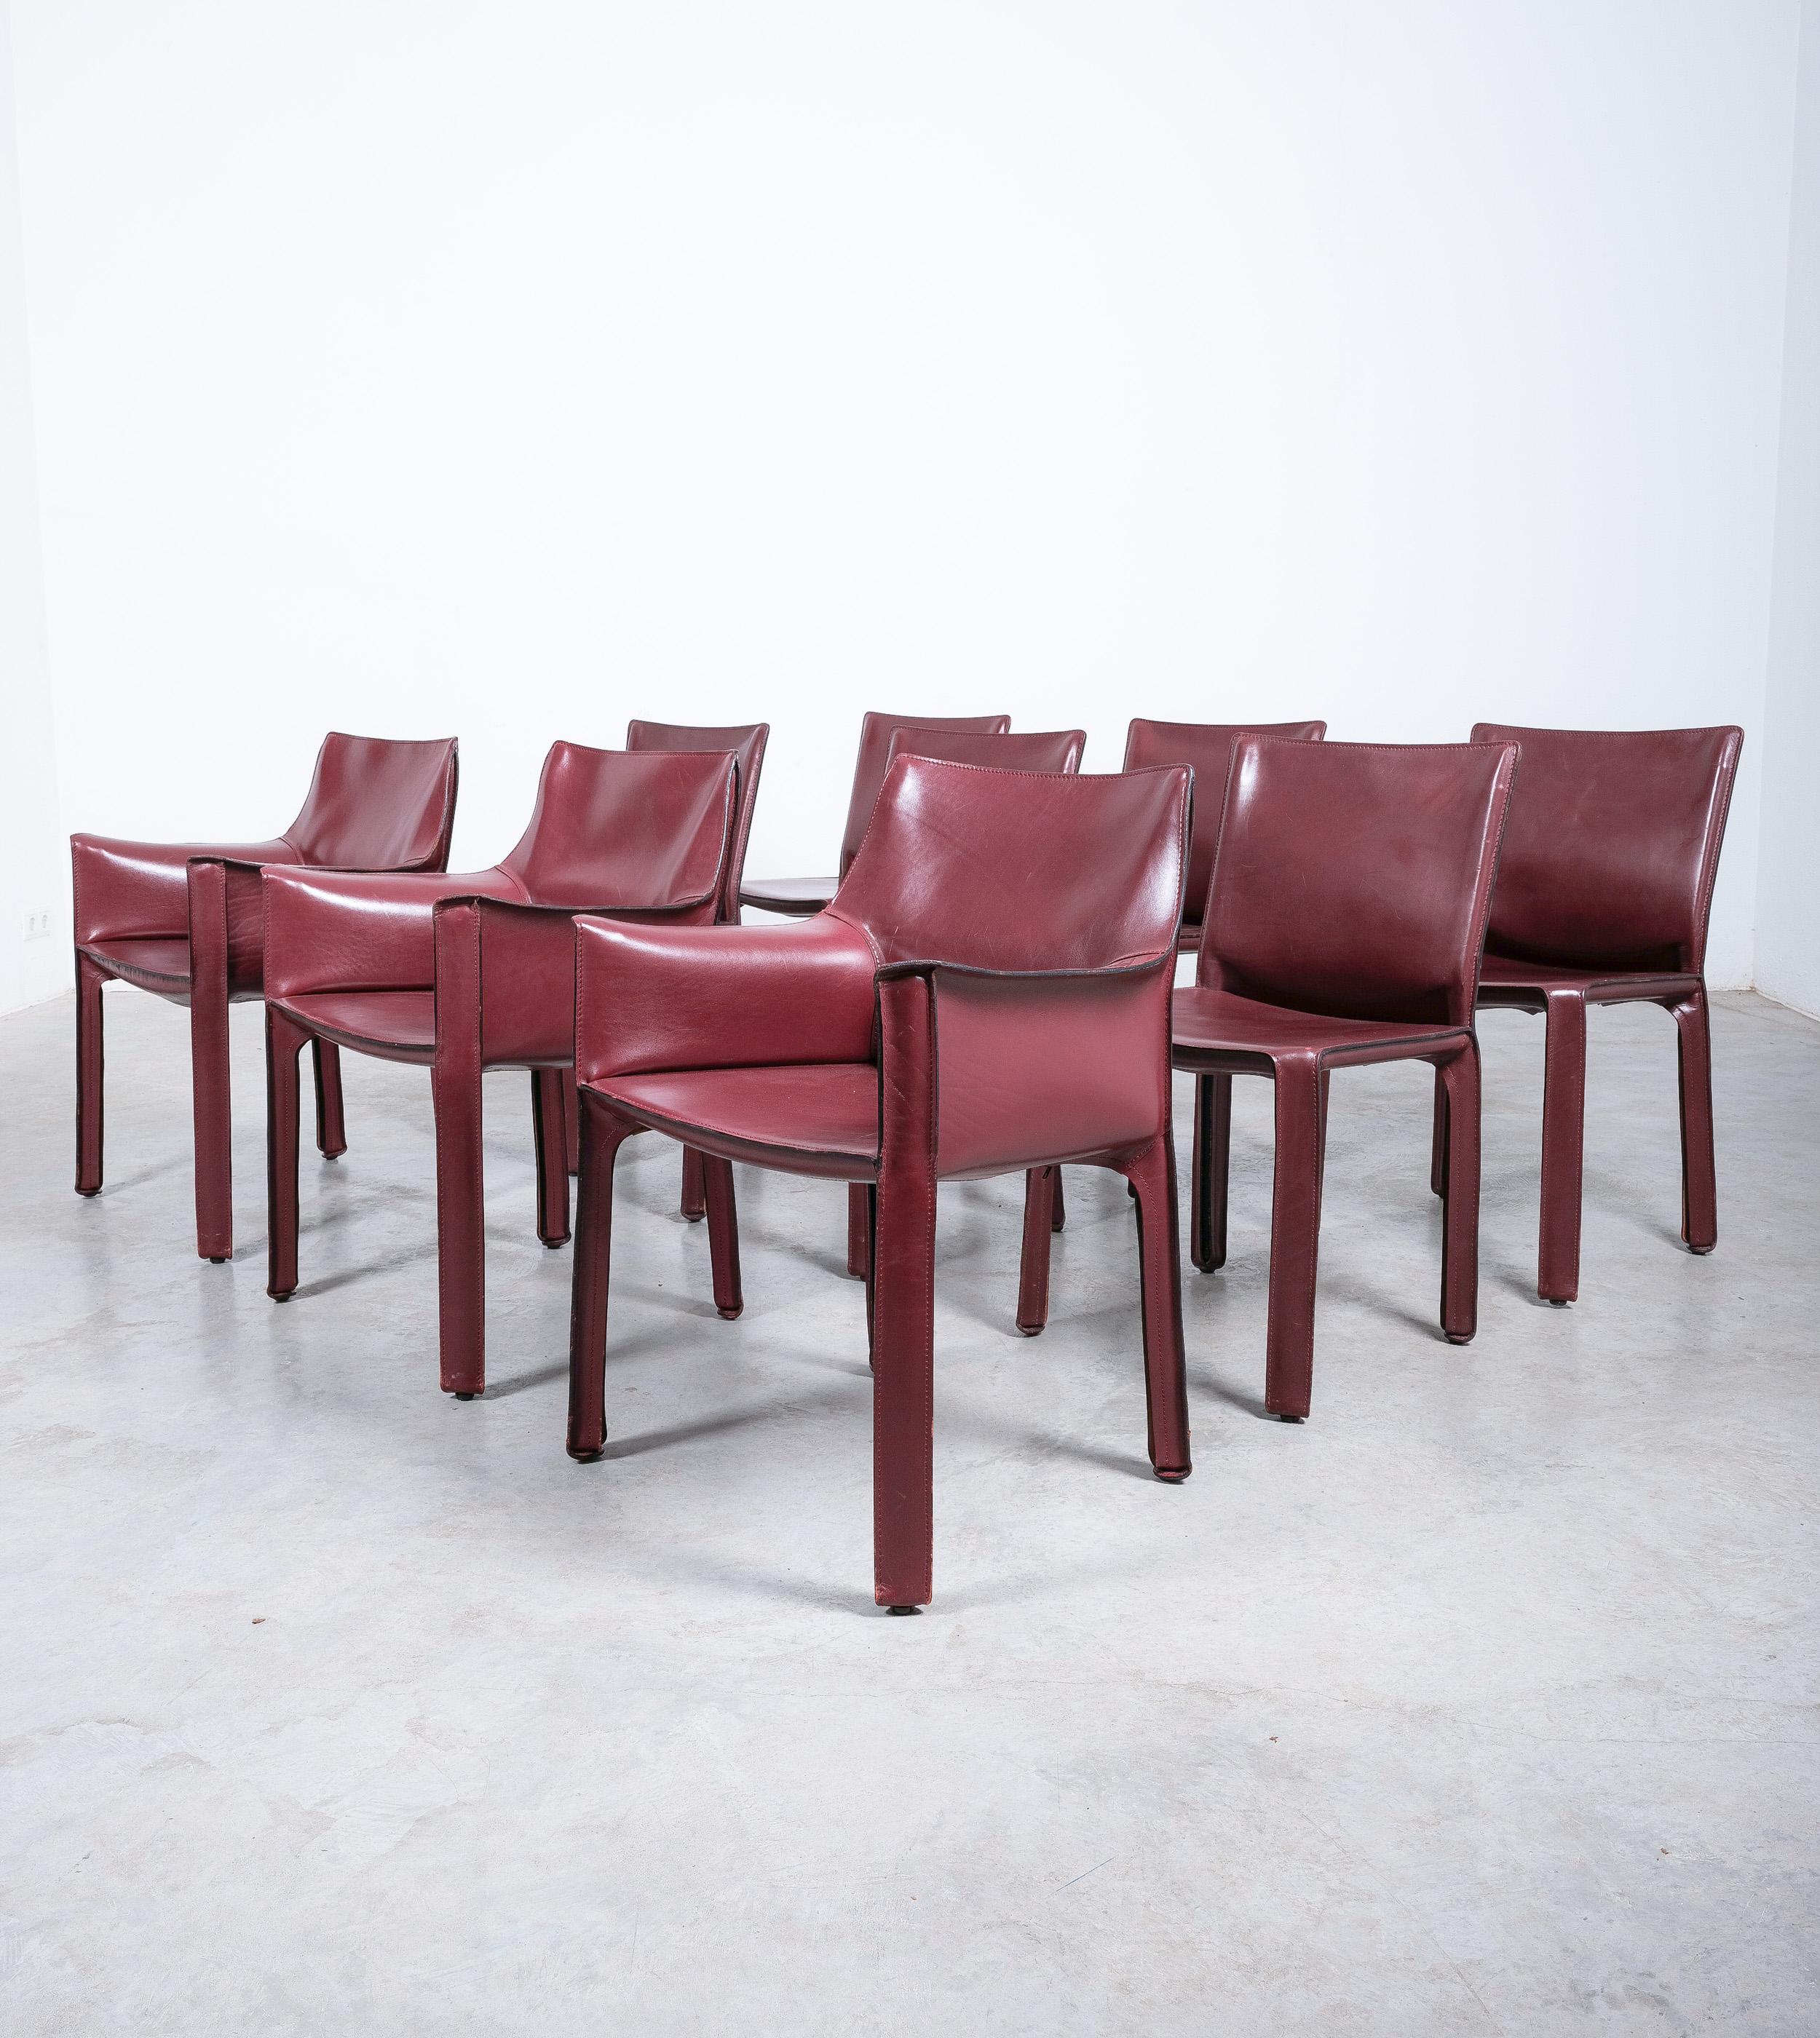 Italian Mario Bellini Cassina Cab 412, 413 Set of Ten 10 Red Leather Dining Chairs